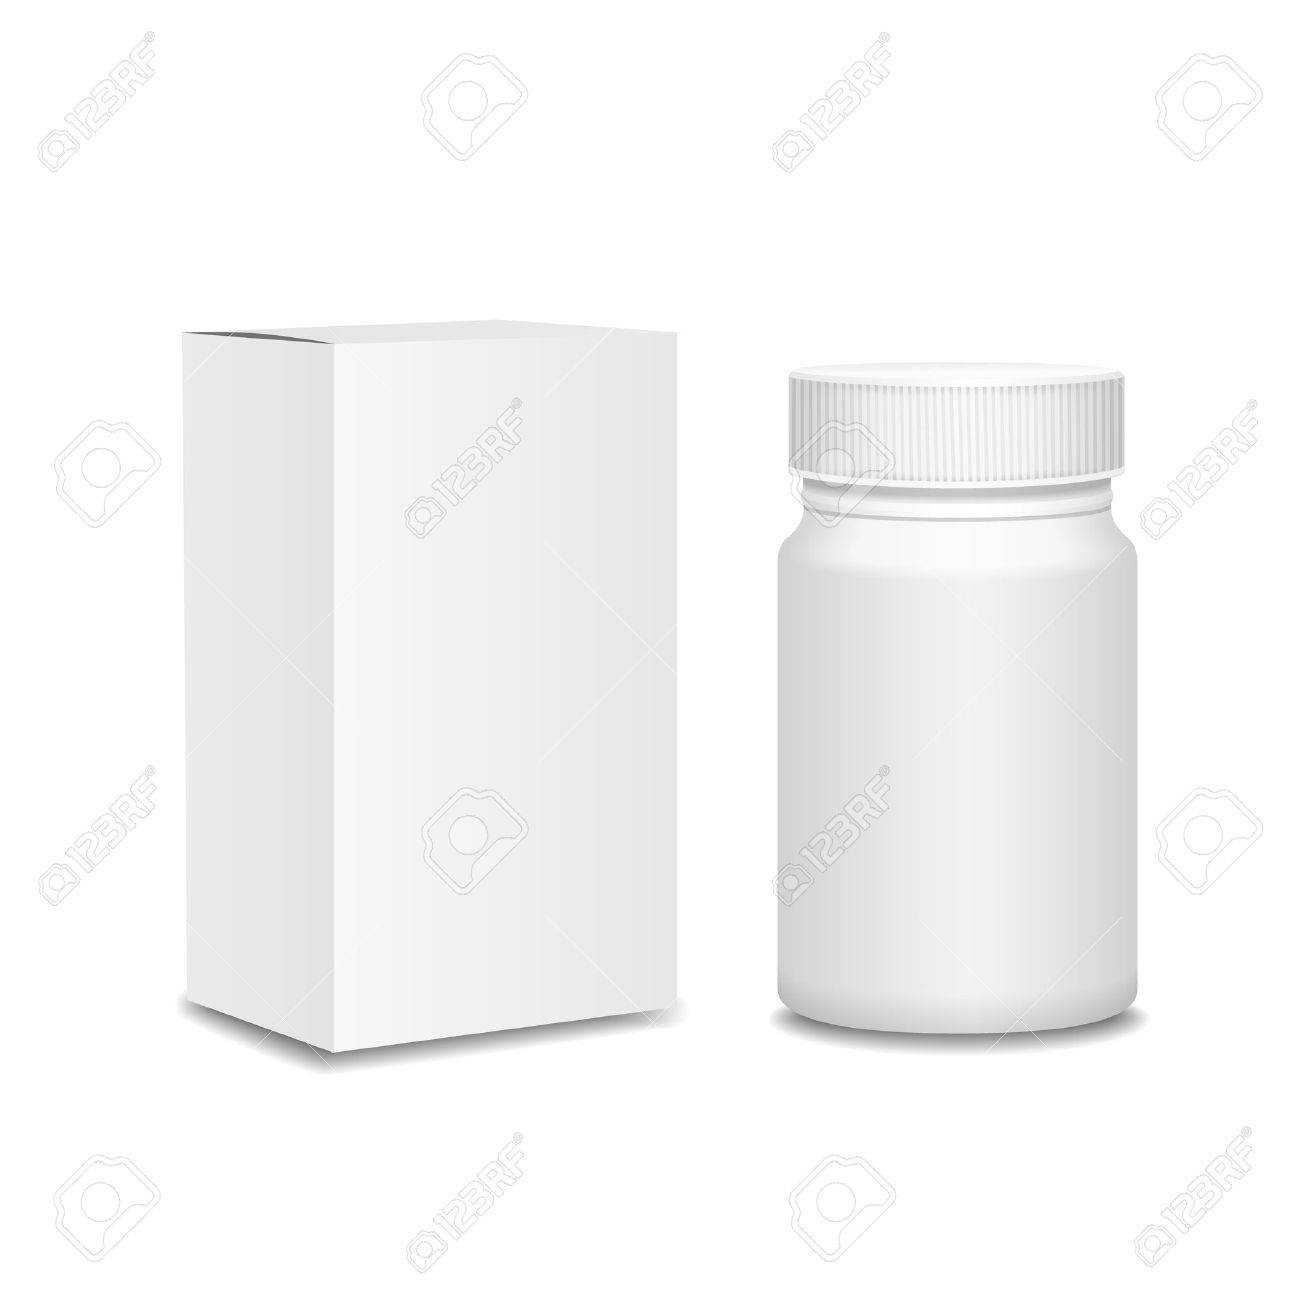 Blank Medicine Bottle And Cardboard Packaging, Vitamins, Examples.. With Blank Packaging Templates